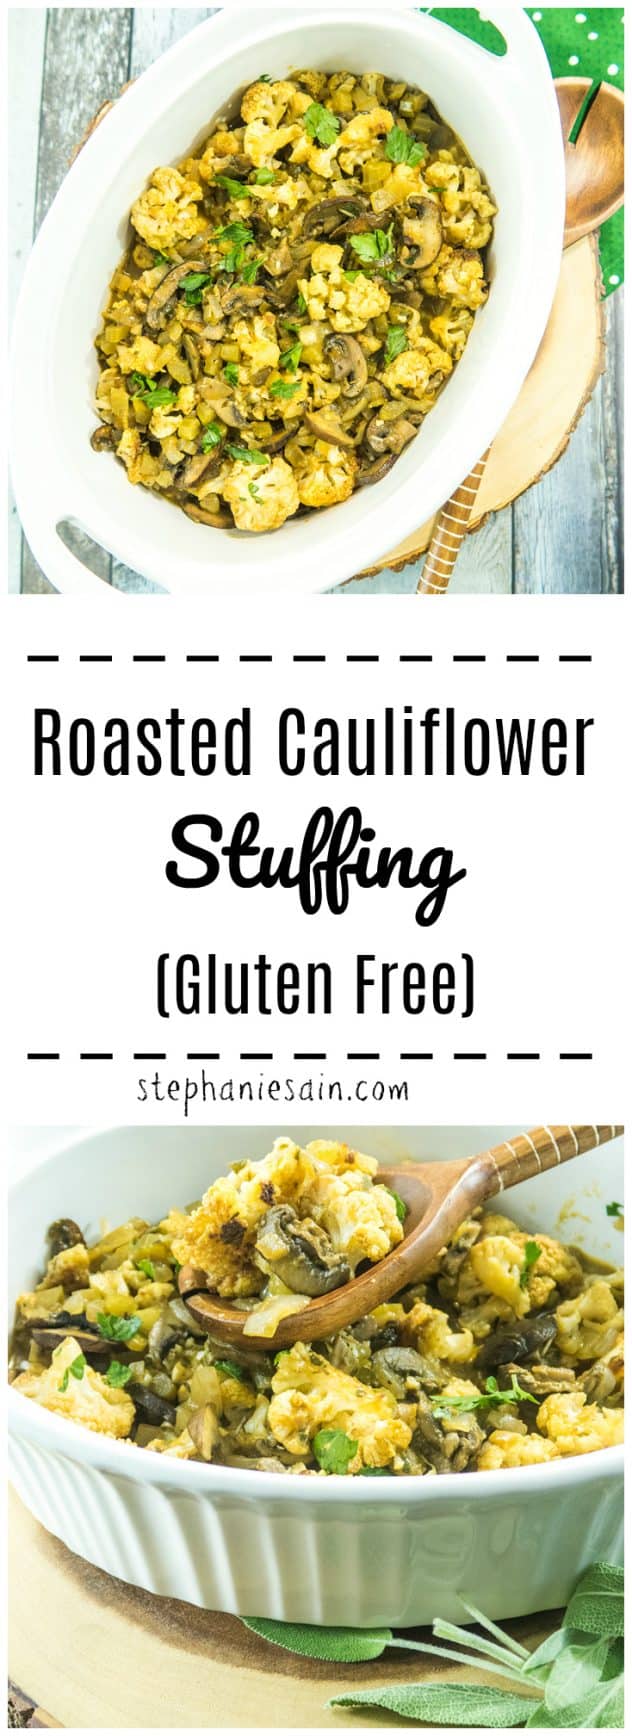 Roasted Cauliflower Stuffing is a low carb, gluten free alternative to traditional bread stuffing. Made with all the same traditional flavors, along with roasted cauliflower. Great as a holiday side or anytime. Vegan option .